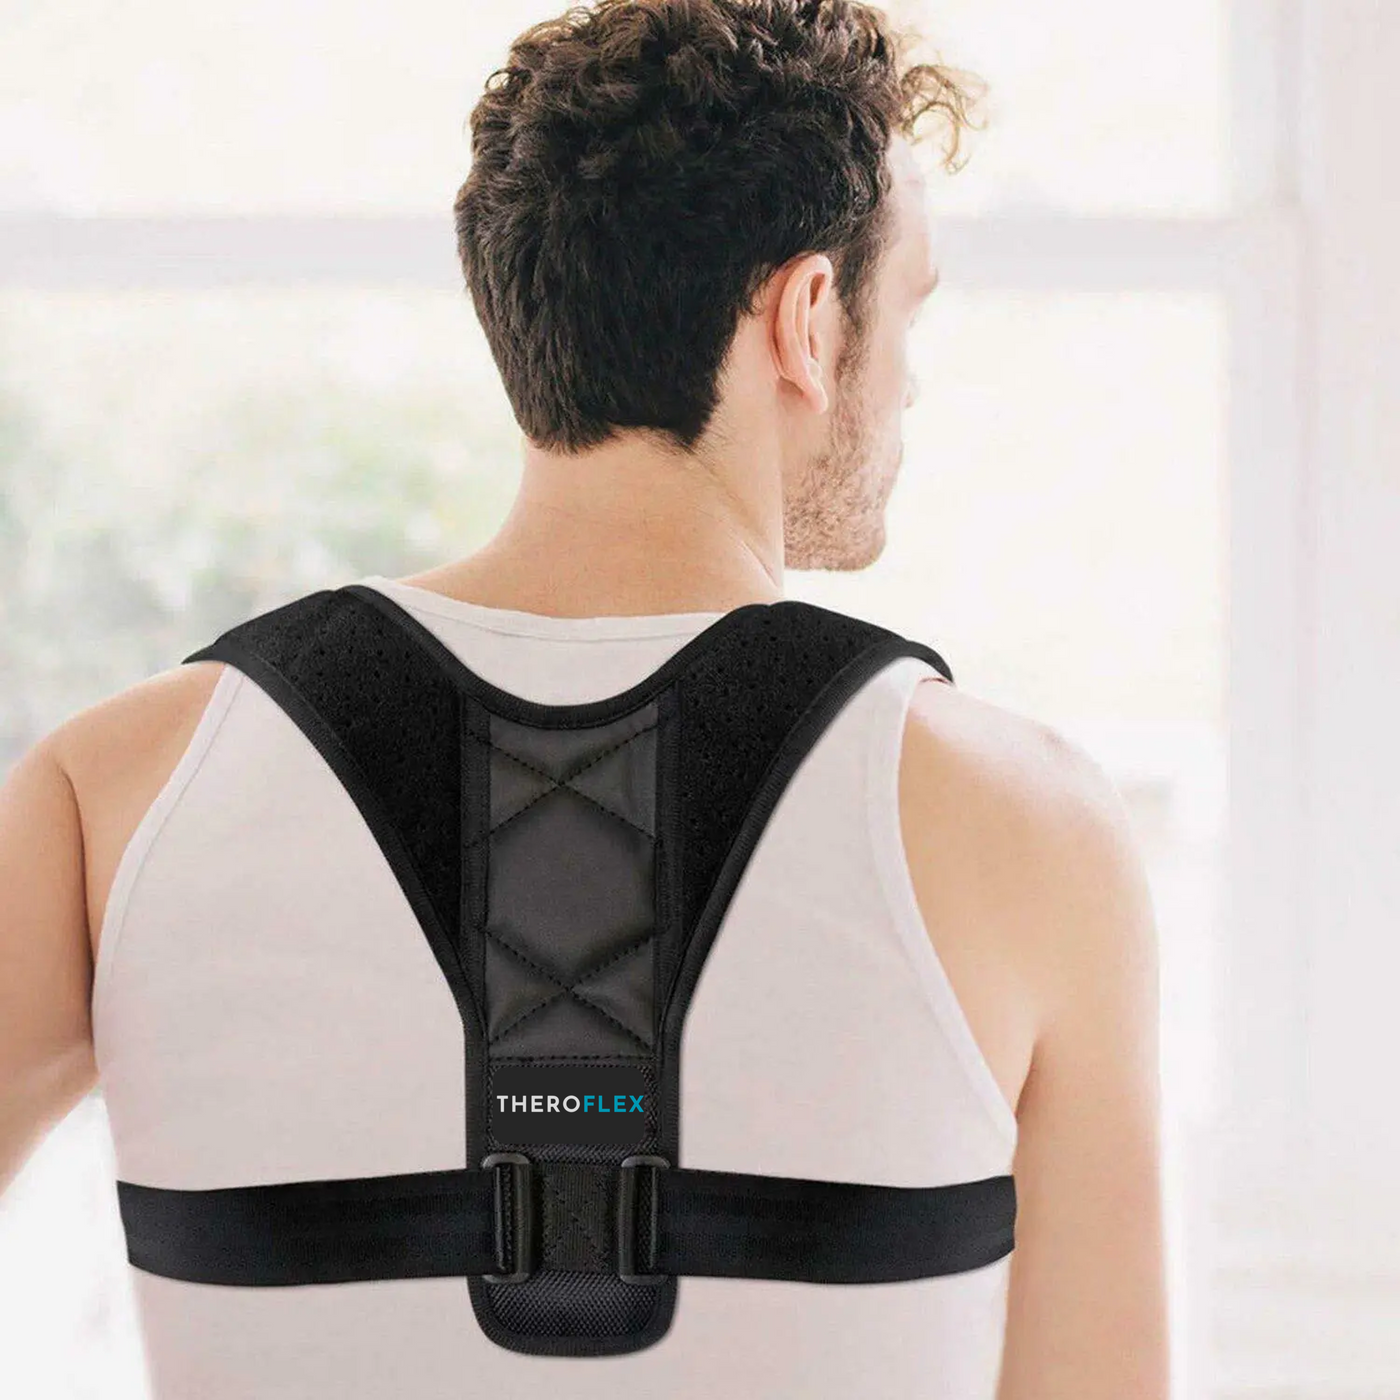 Theroflex© Premium Back Posture Corrector Support: One Size Fits All DPD2